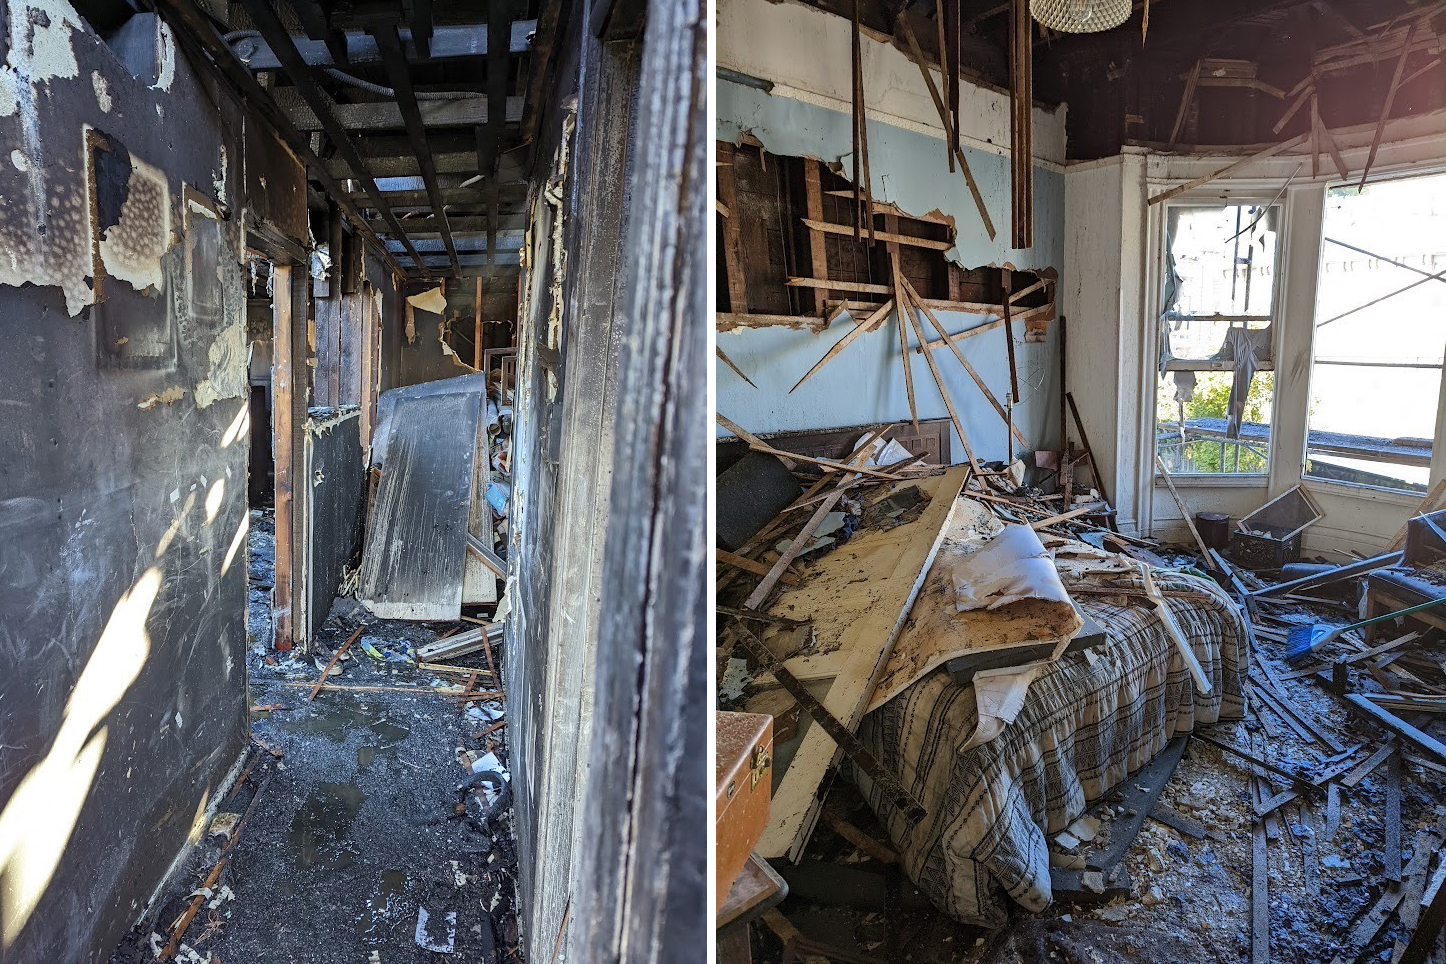 A side-by-side composite photo shows fire damage to the interior of an apartment building.